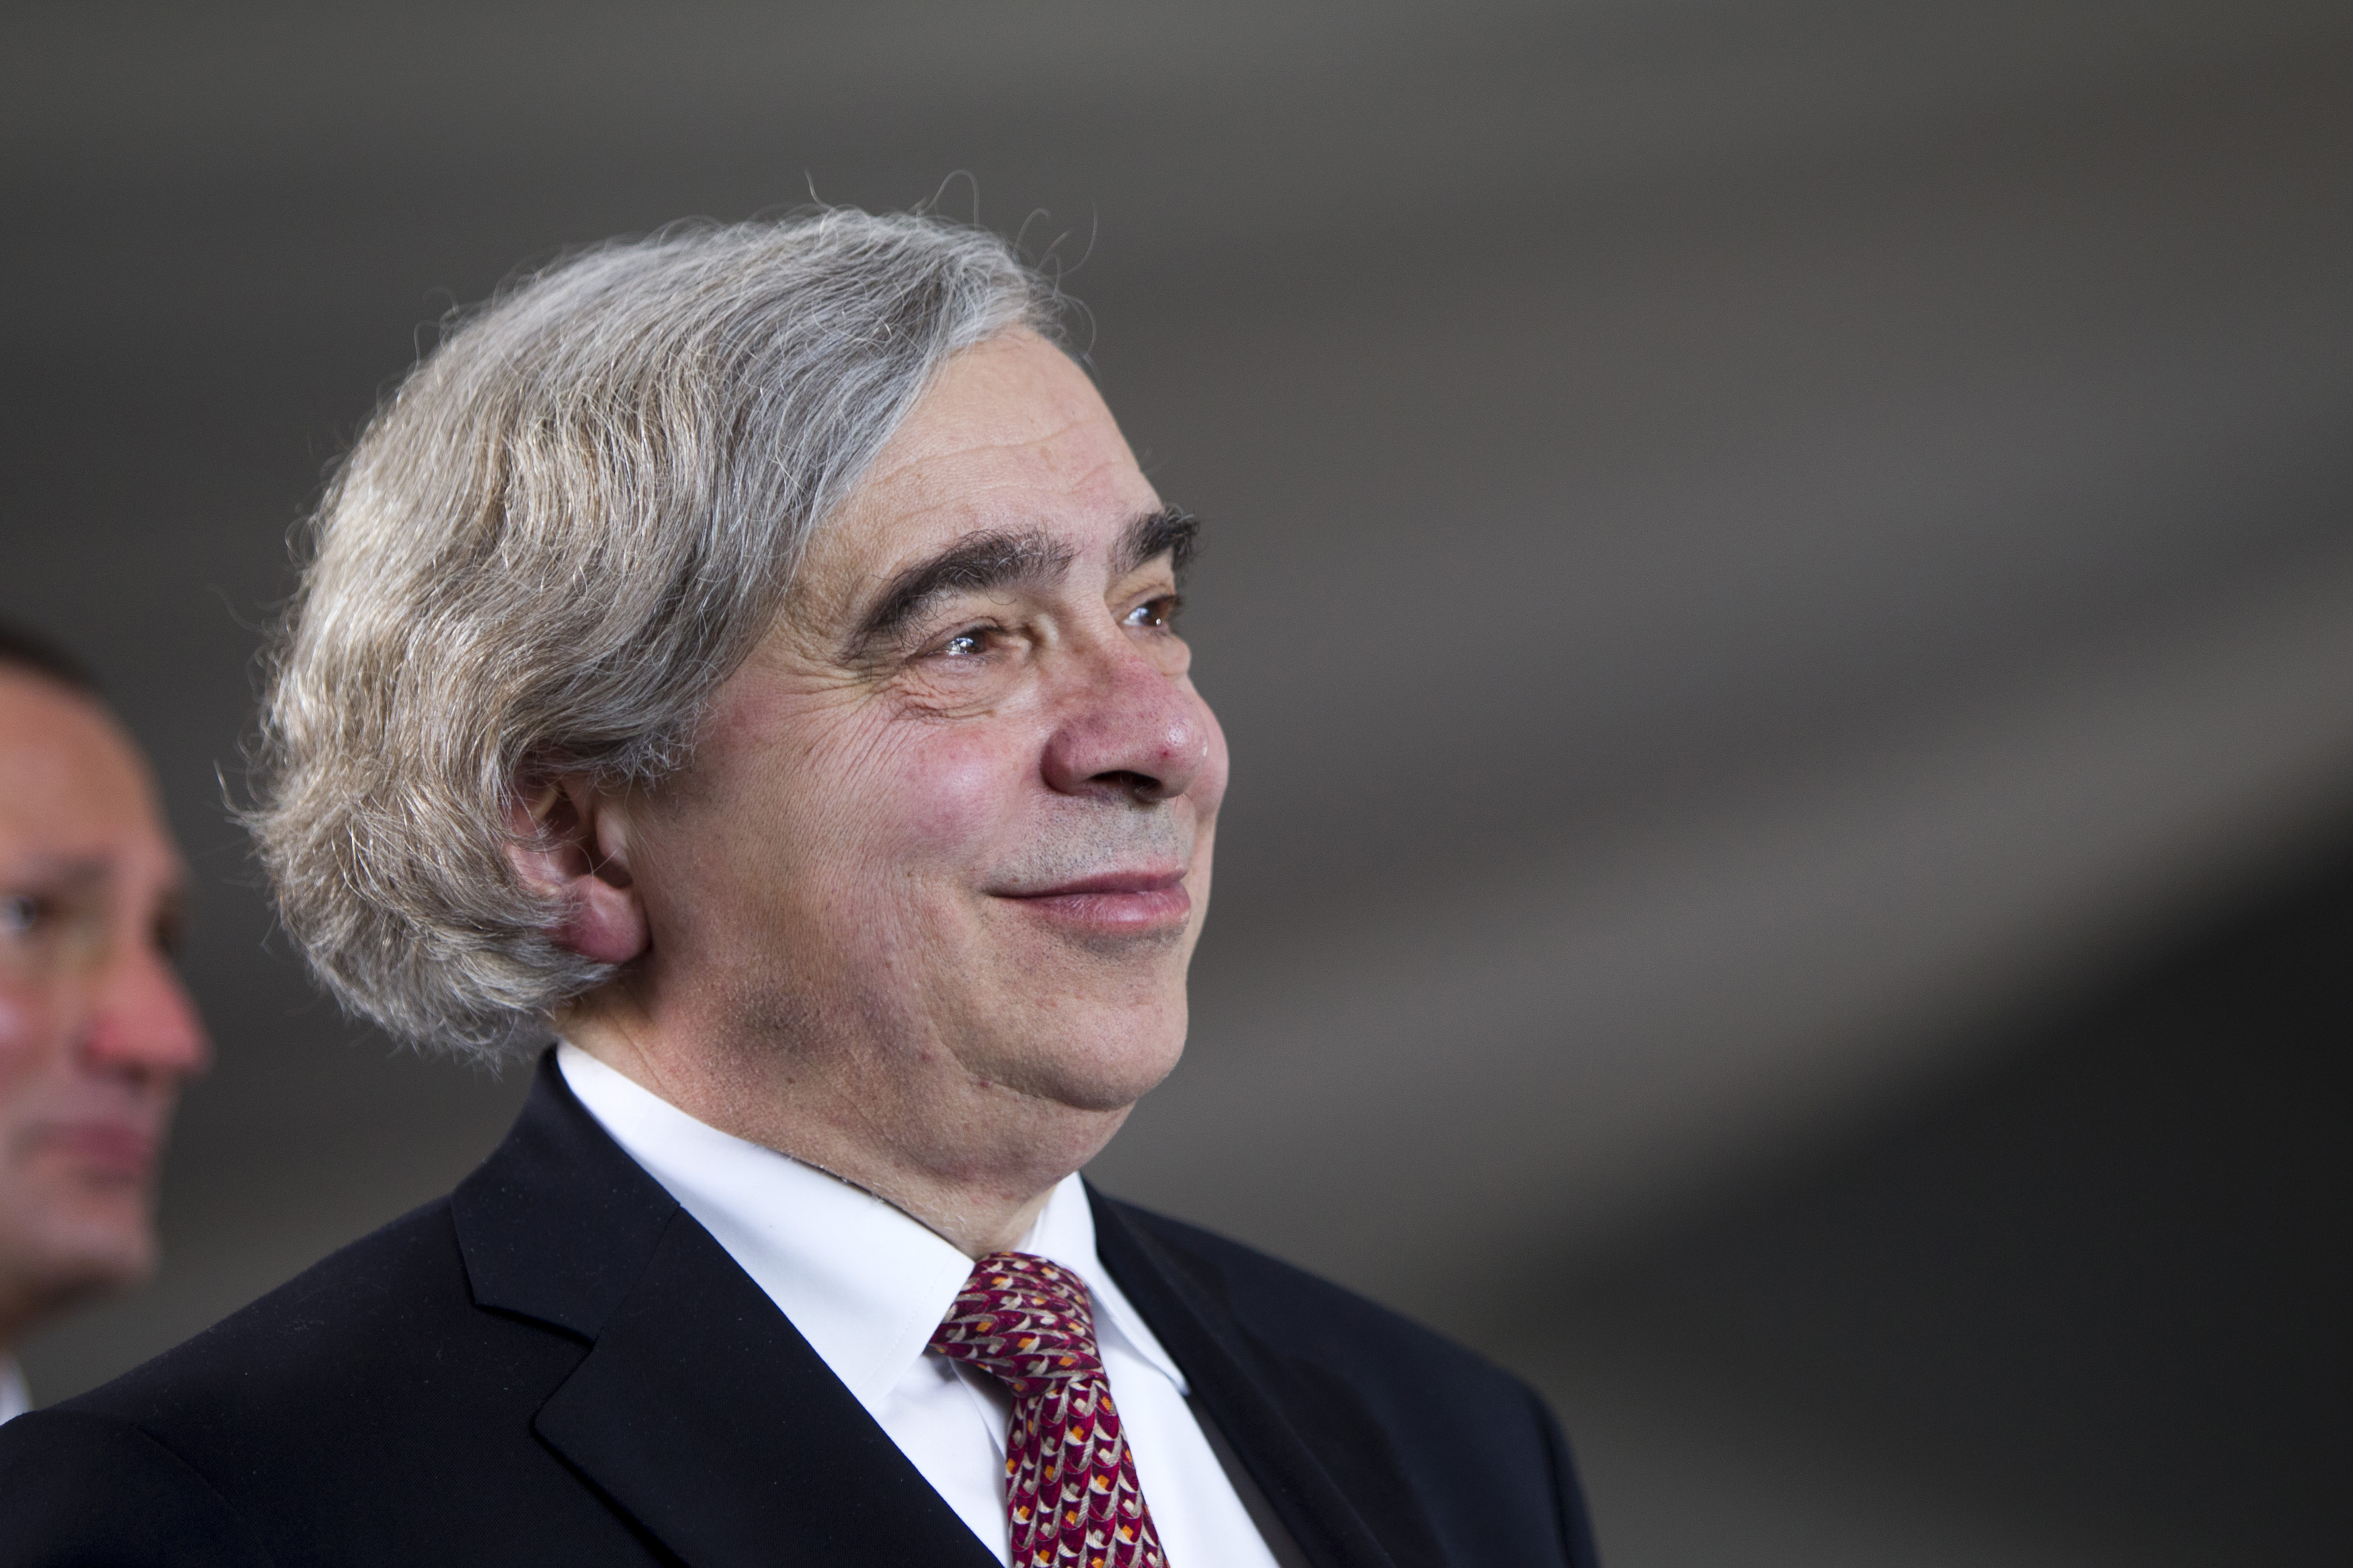 U.S. Secretary of Energy Ernest Moniz attends the grand opening of the Ivanpah Solar Electric Generating System in the Mojave Desert near the California-Nevada border Feb. 13, 2014. (Steve Marcus—Reuters)